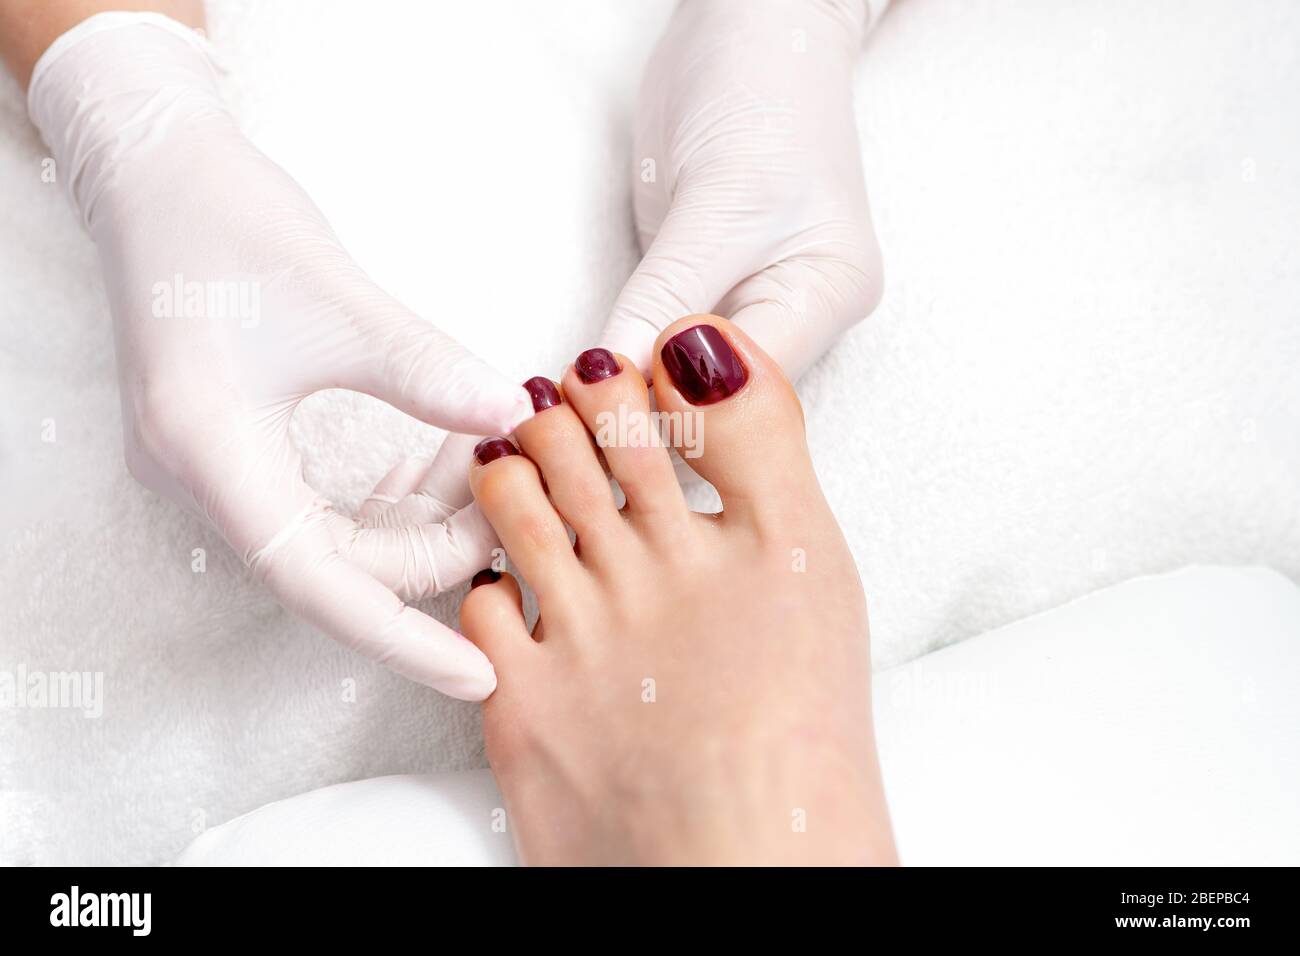 Pedicurist hands showing woman toenails painted in dark red color, top view. Stock Photo